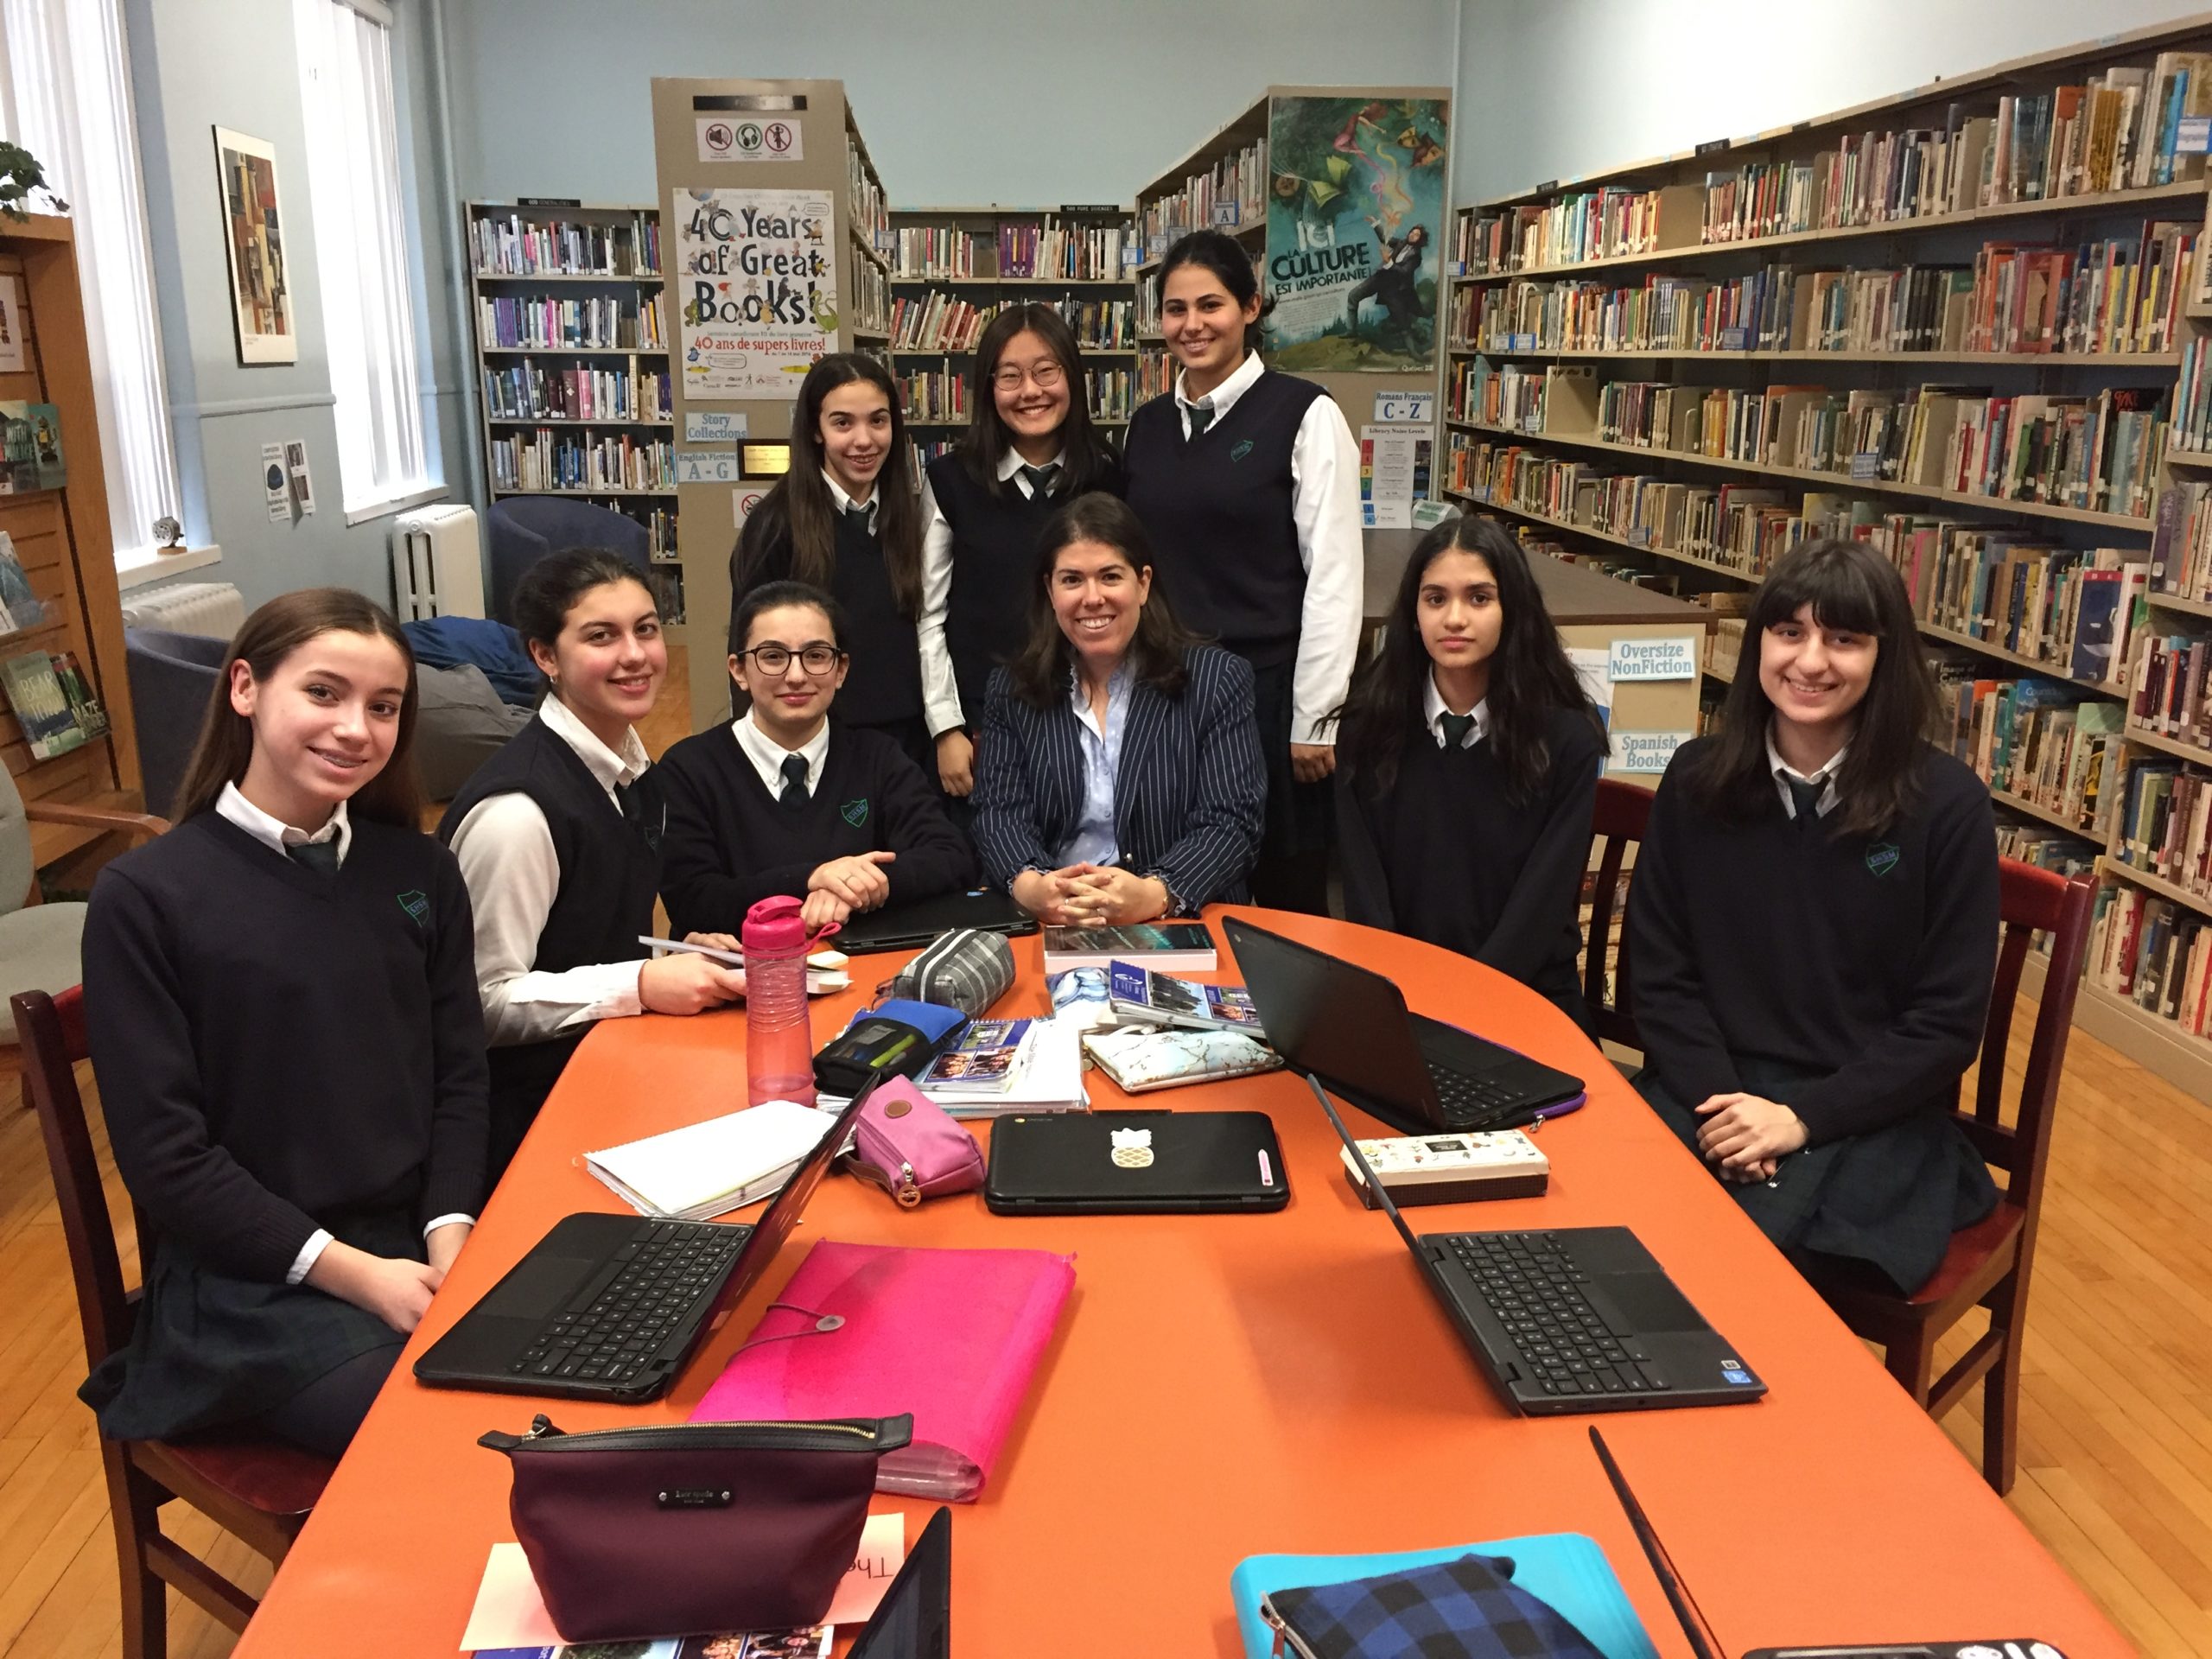 Prime Minister's Award for Teaching Excellence recipient Erika Rath with students at The Sacred Heart School of Montreal library